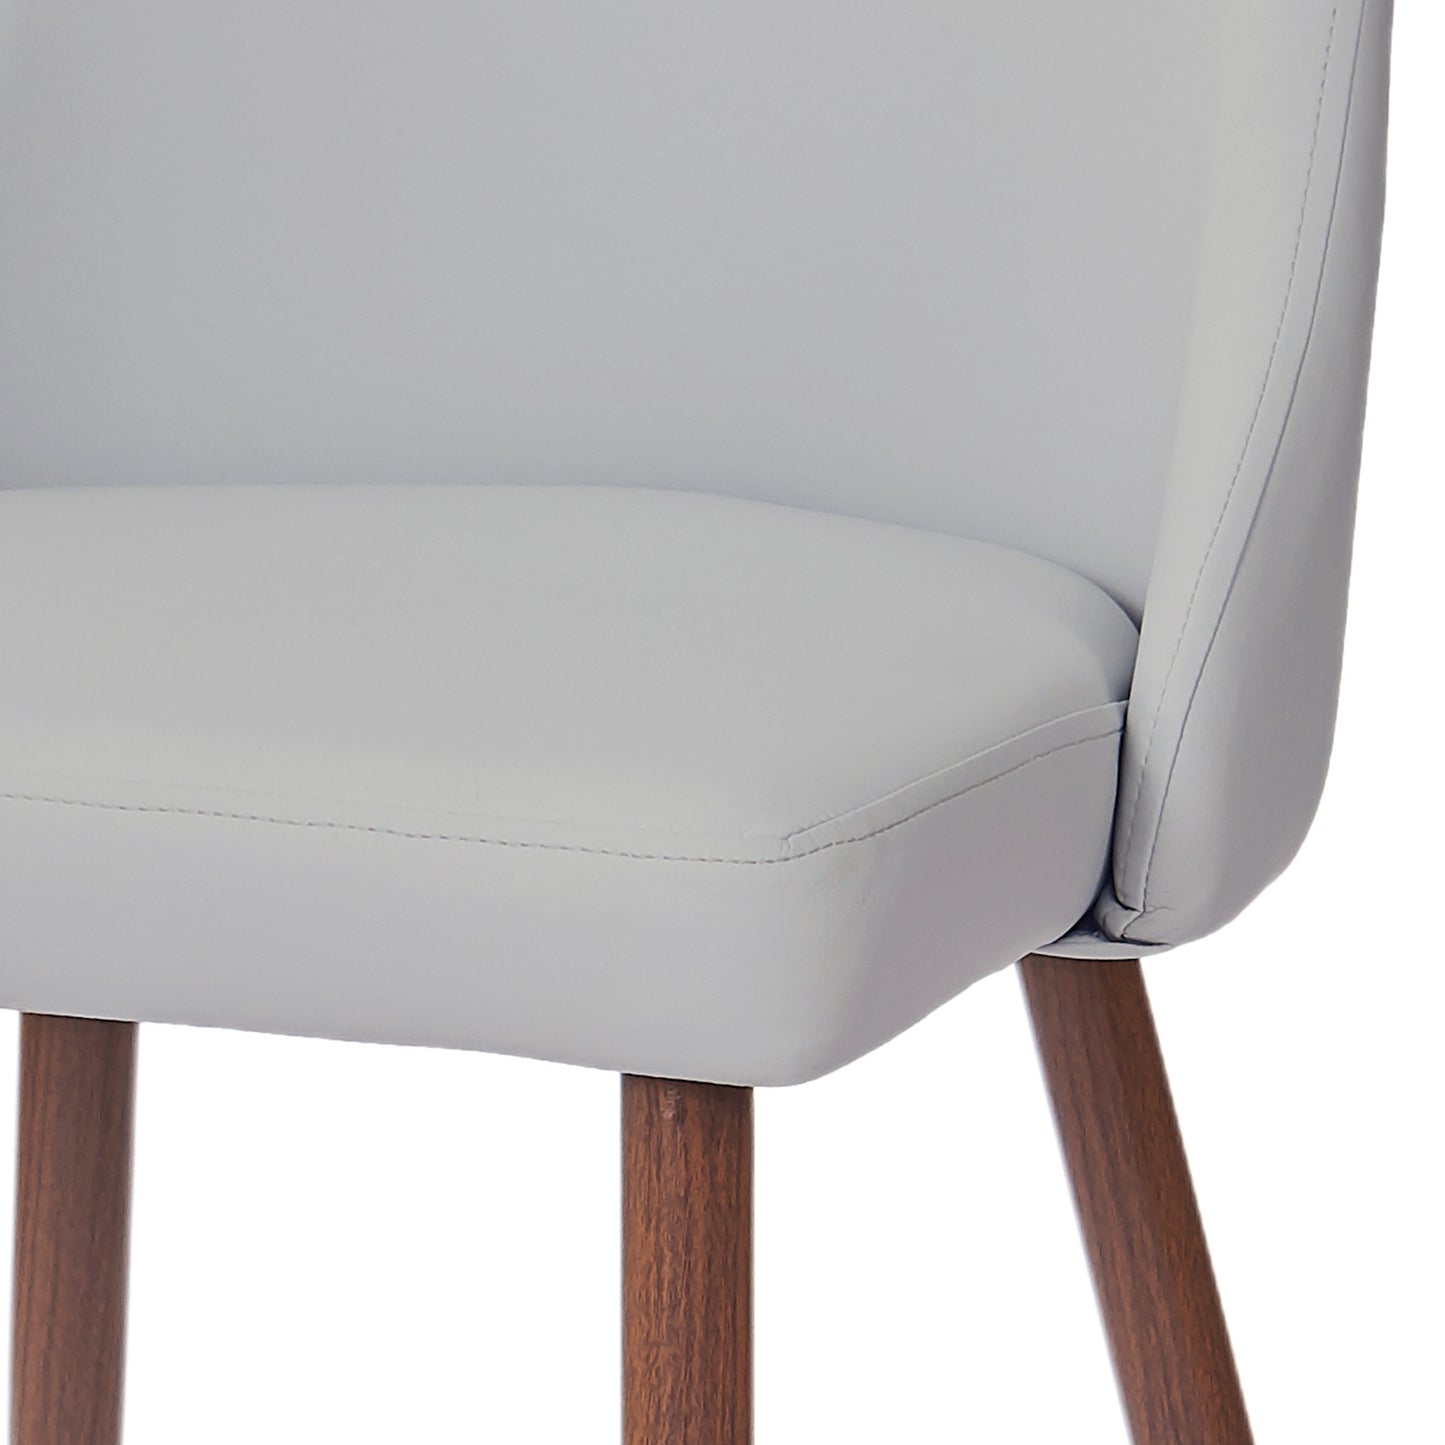 Cora Faux Leather Side Chair, Set of 2 in Light Grey and Walnut